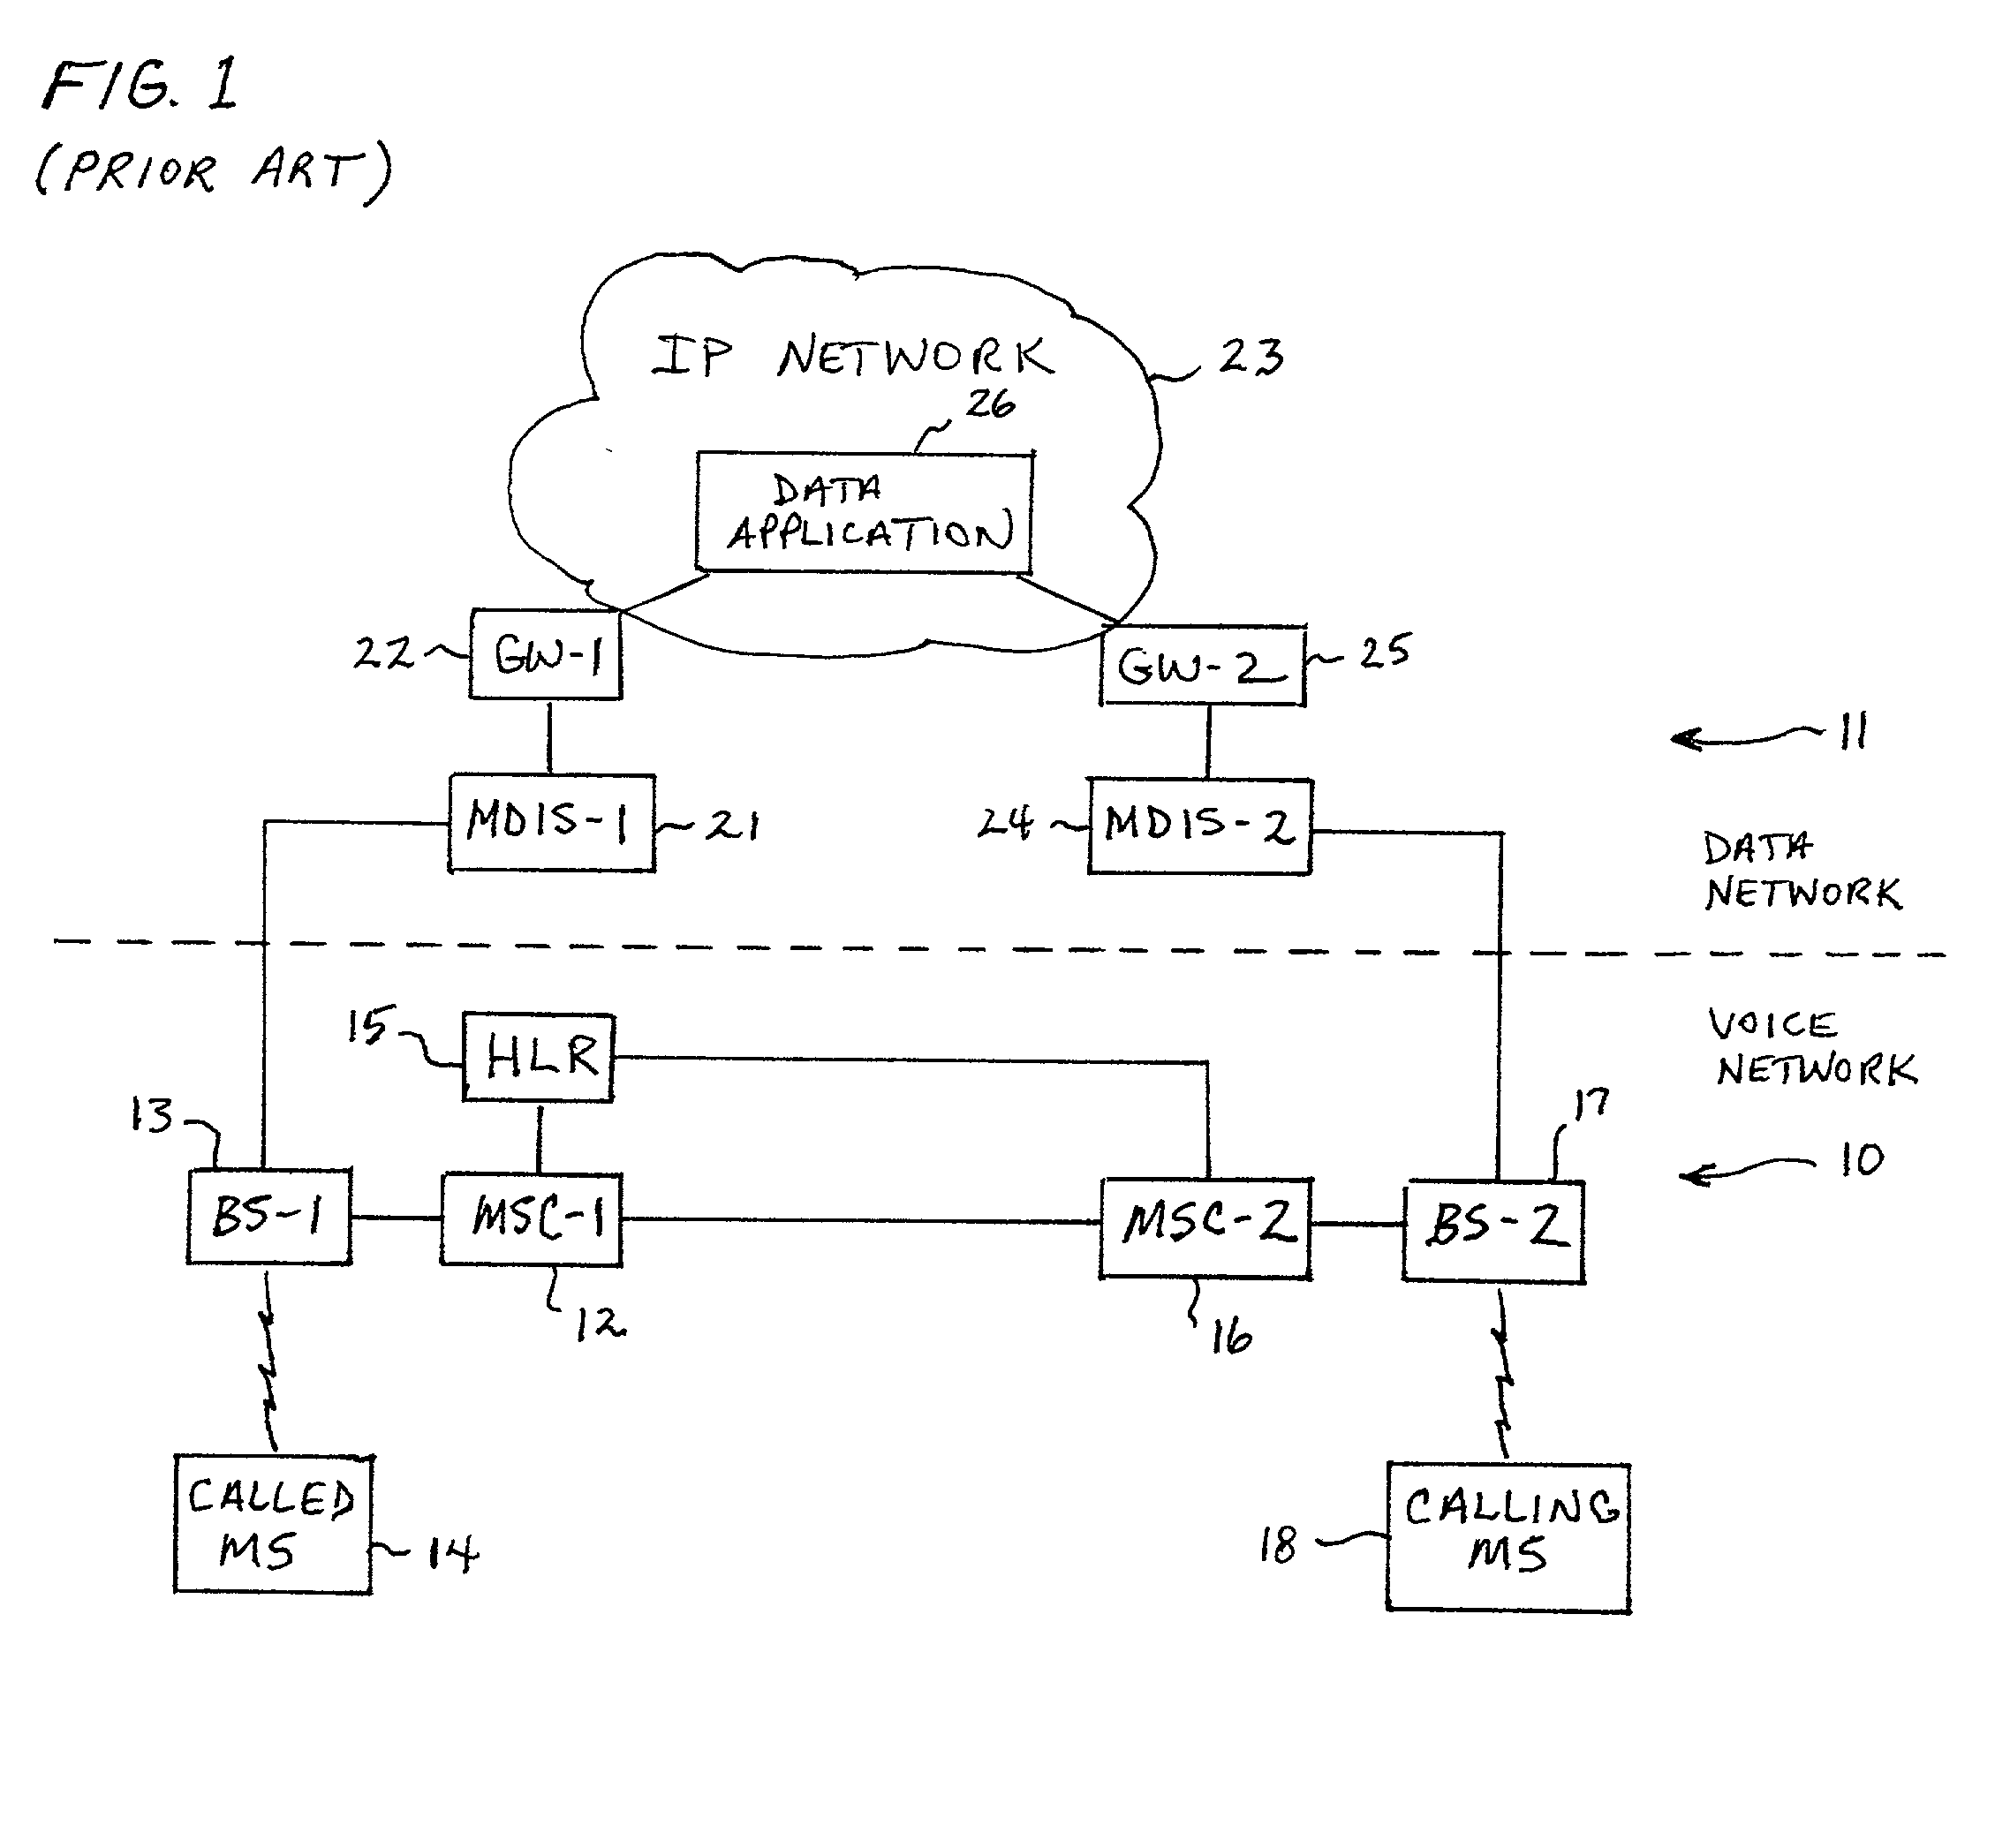 System and method of providing voice and data features in a time division multiple access (TDMA) network